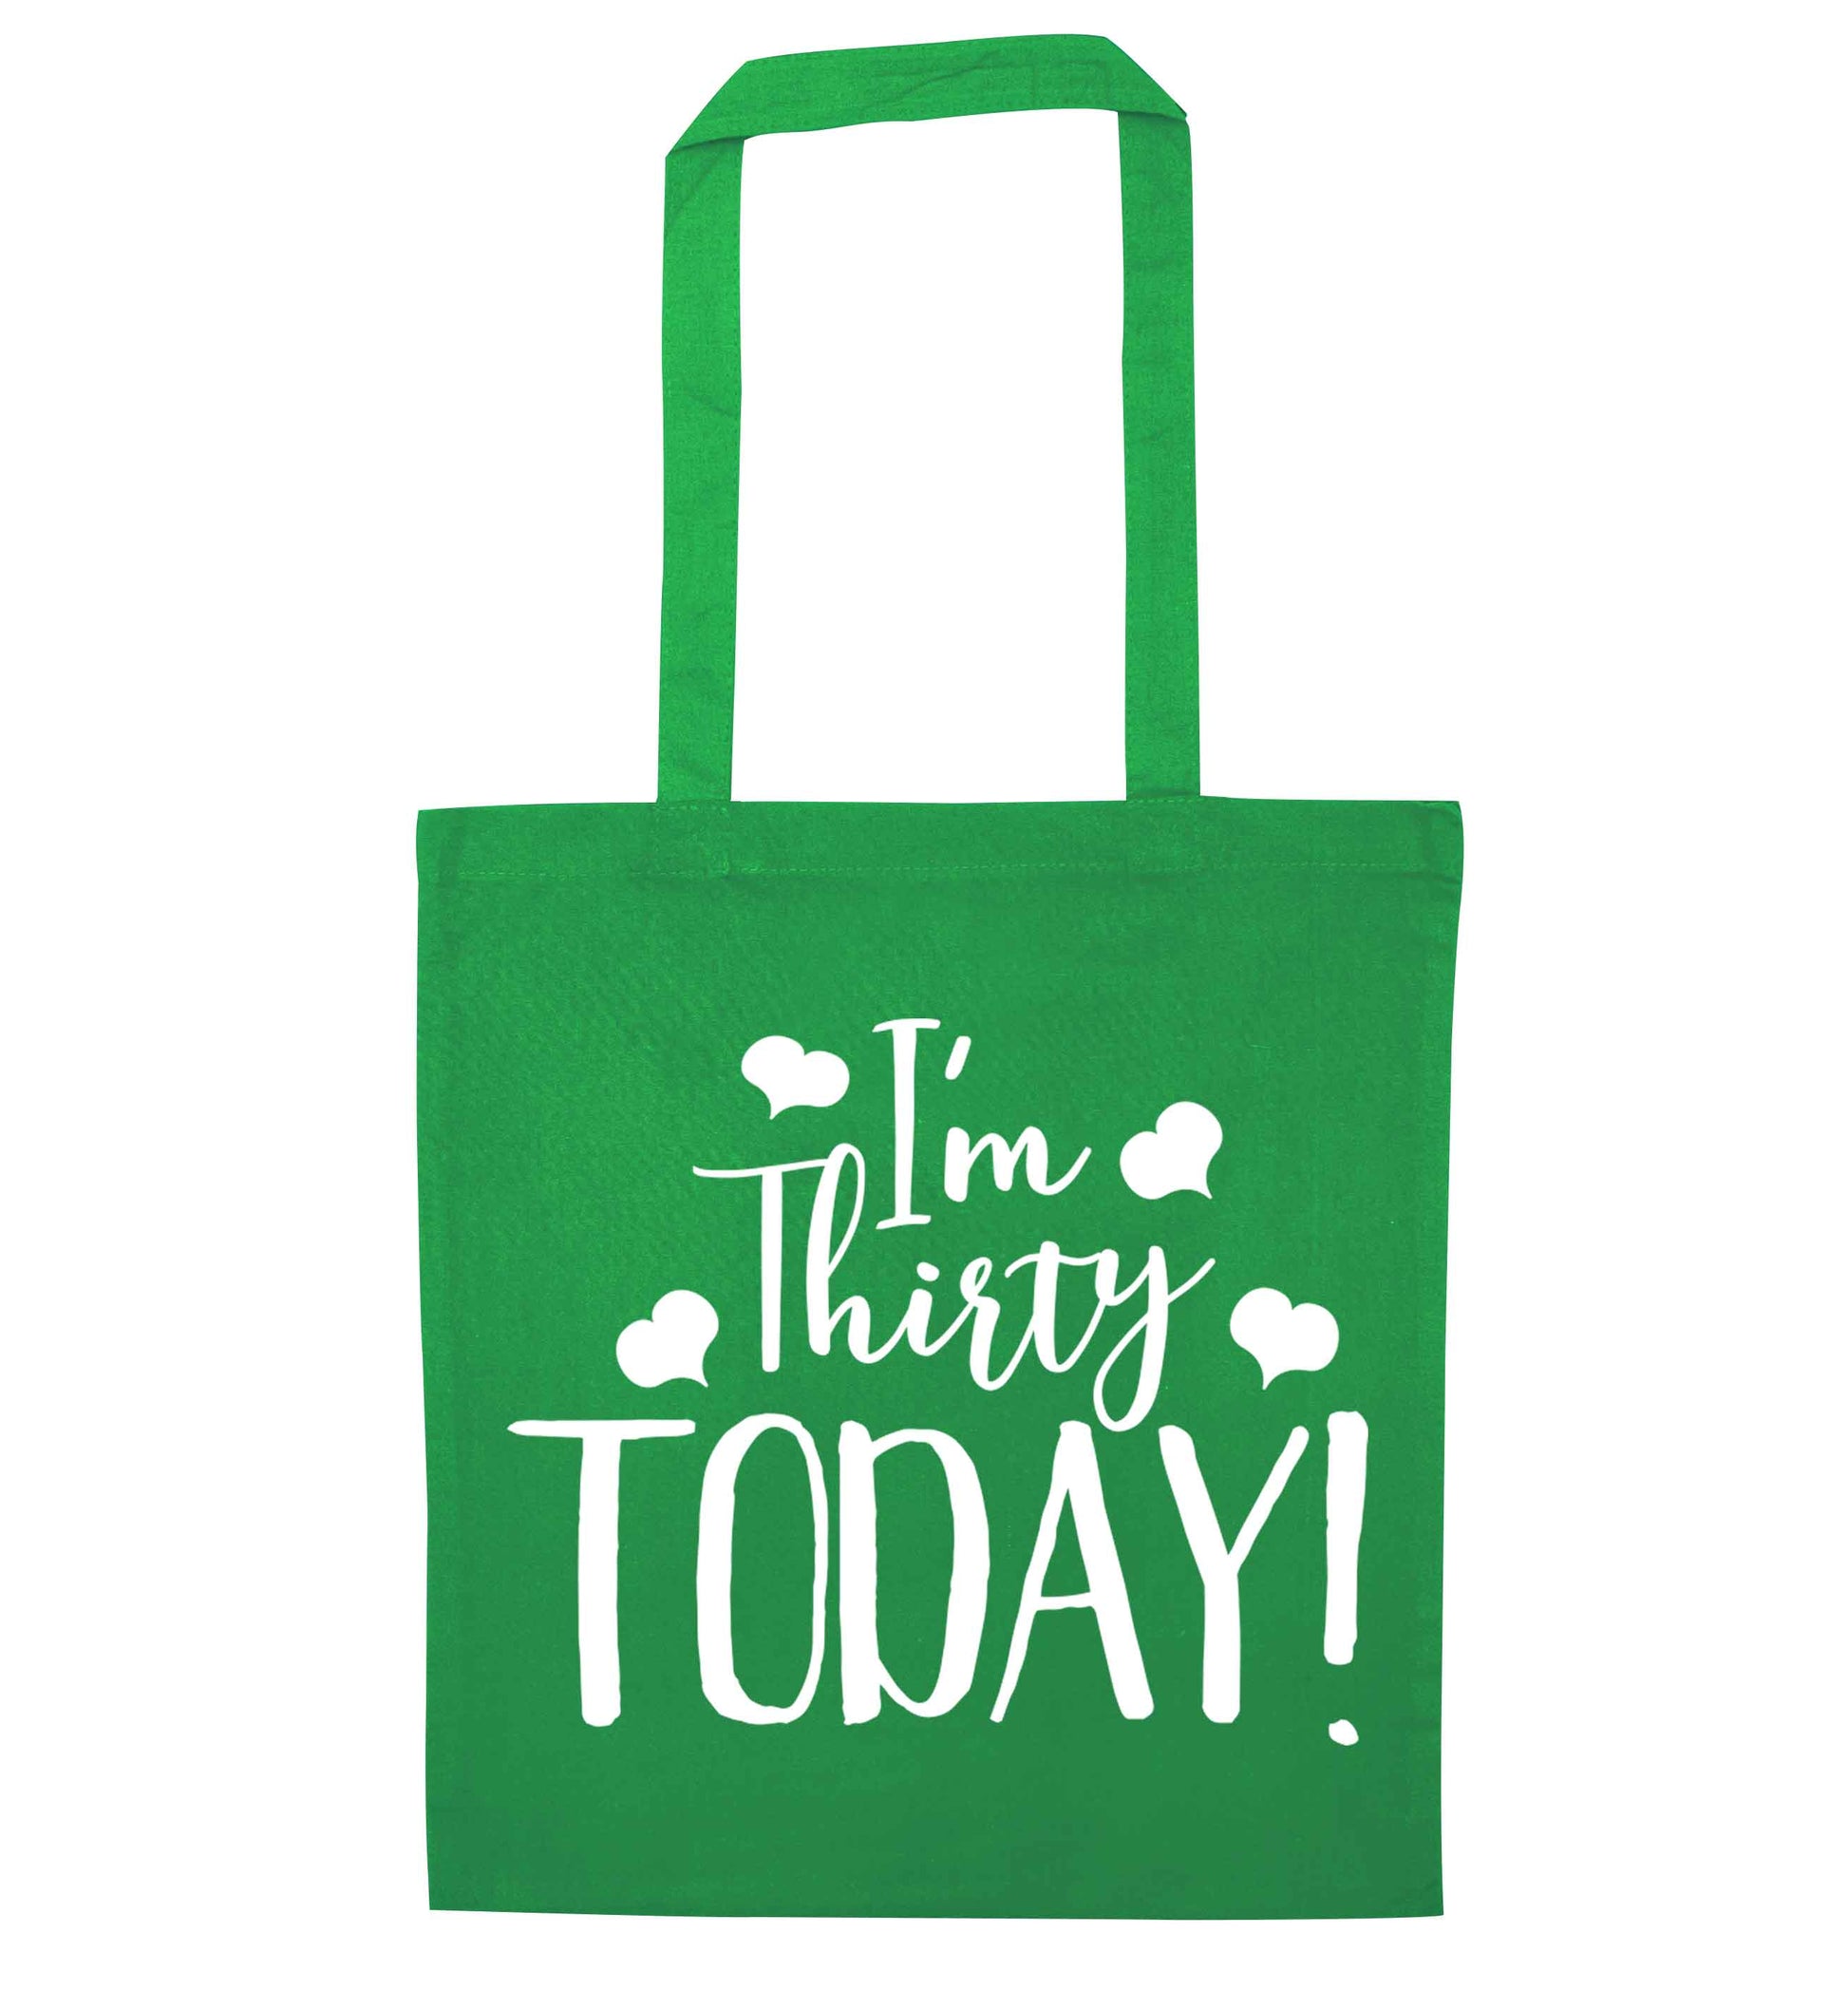 I'm thirty today! green tote bag